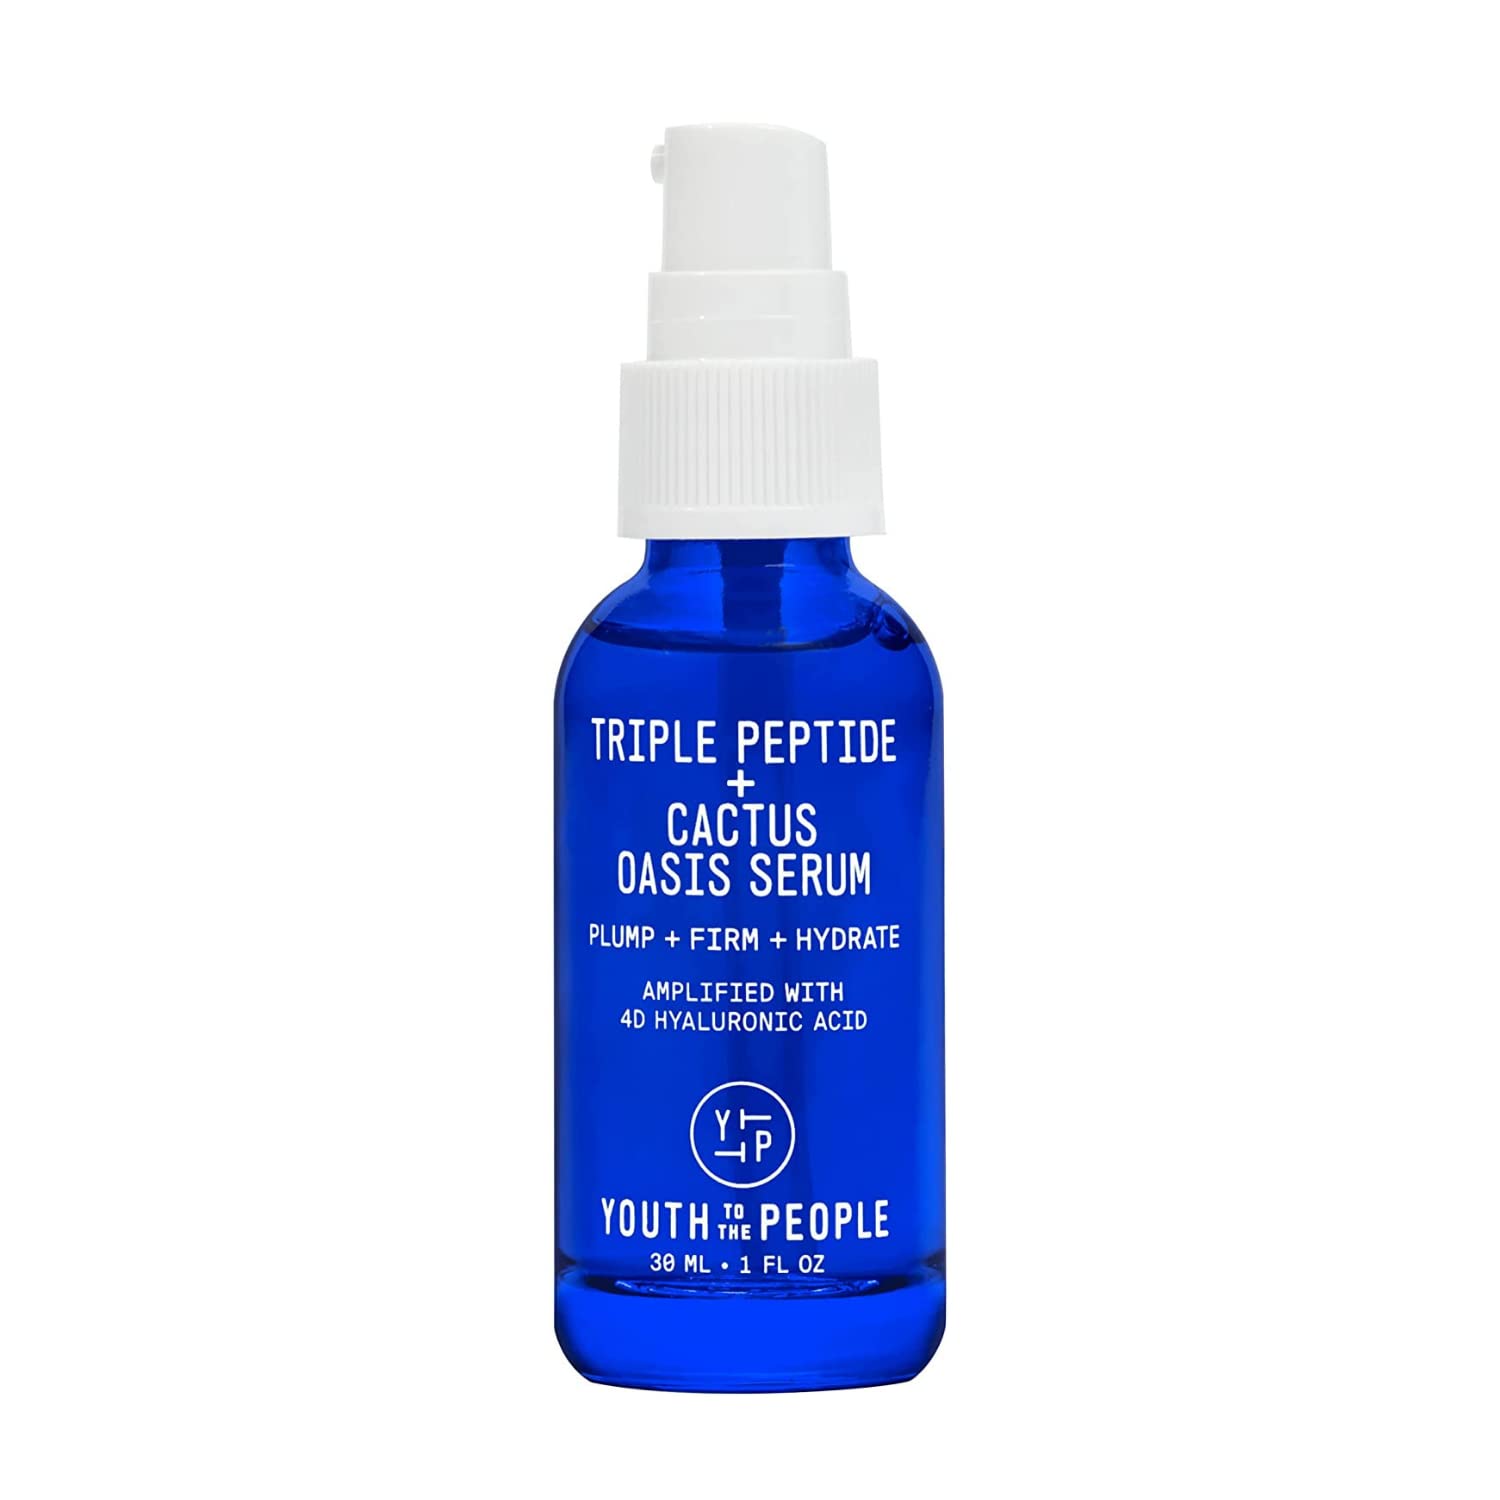 Youth To The People Triple Peptide + Cactus Oasis Face Serum - 4D Hyaluronic Acid Hydrating Serum + Skin Firming Peptides for Face & Malachite Minerals - 3-in-1 Face Tightening Facial Serum (1oz)